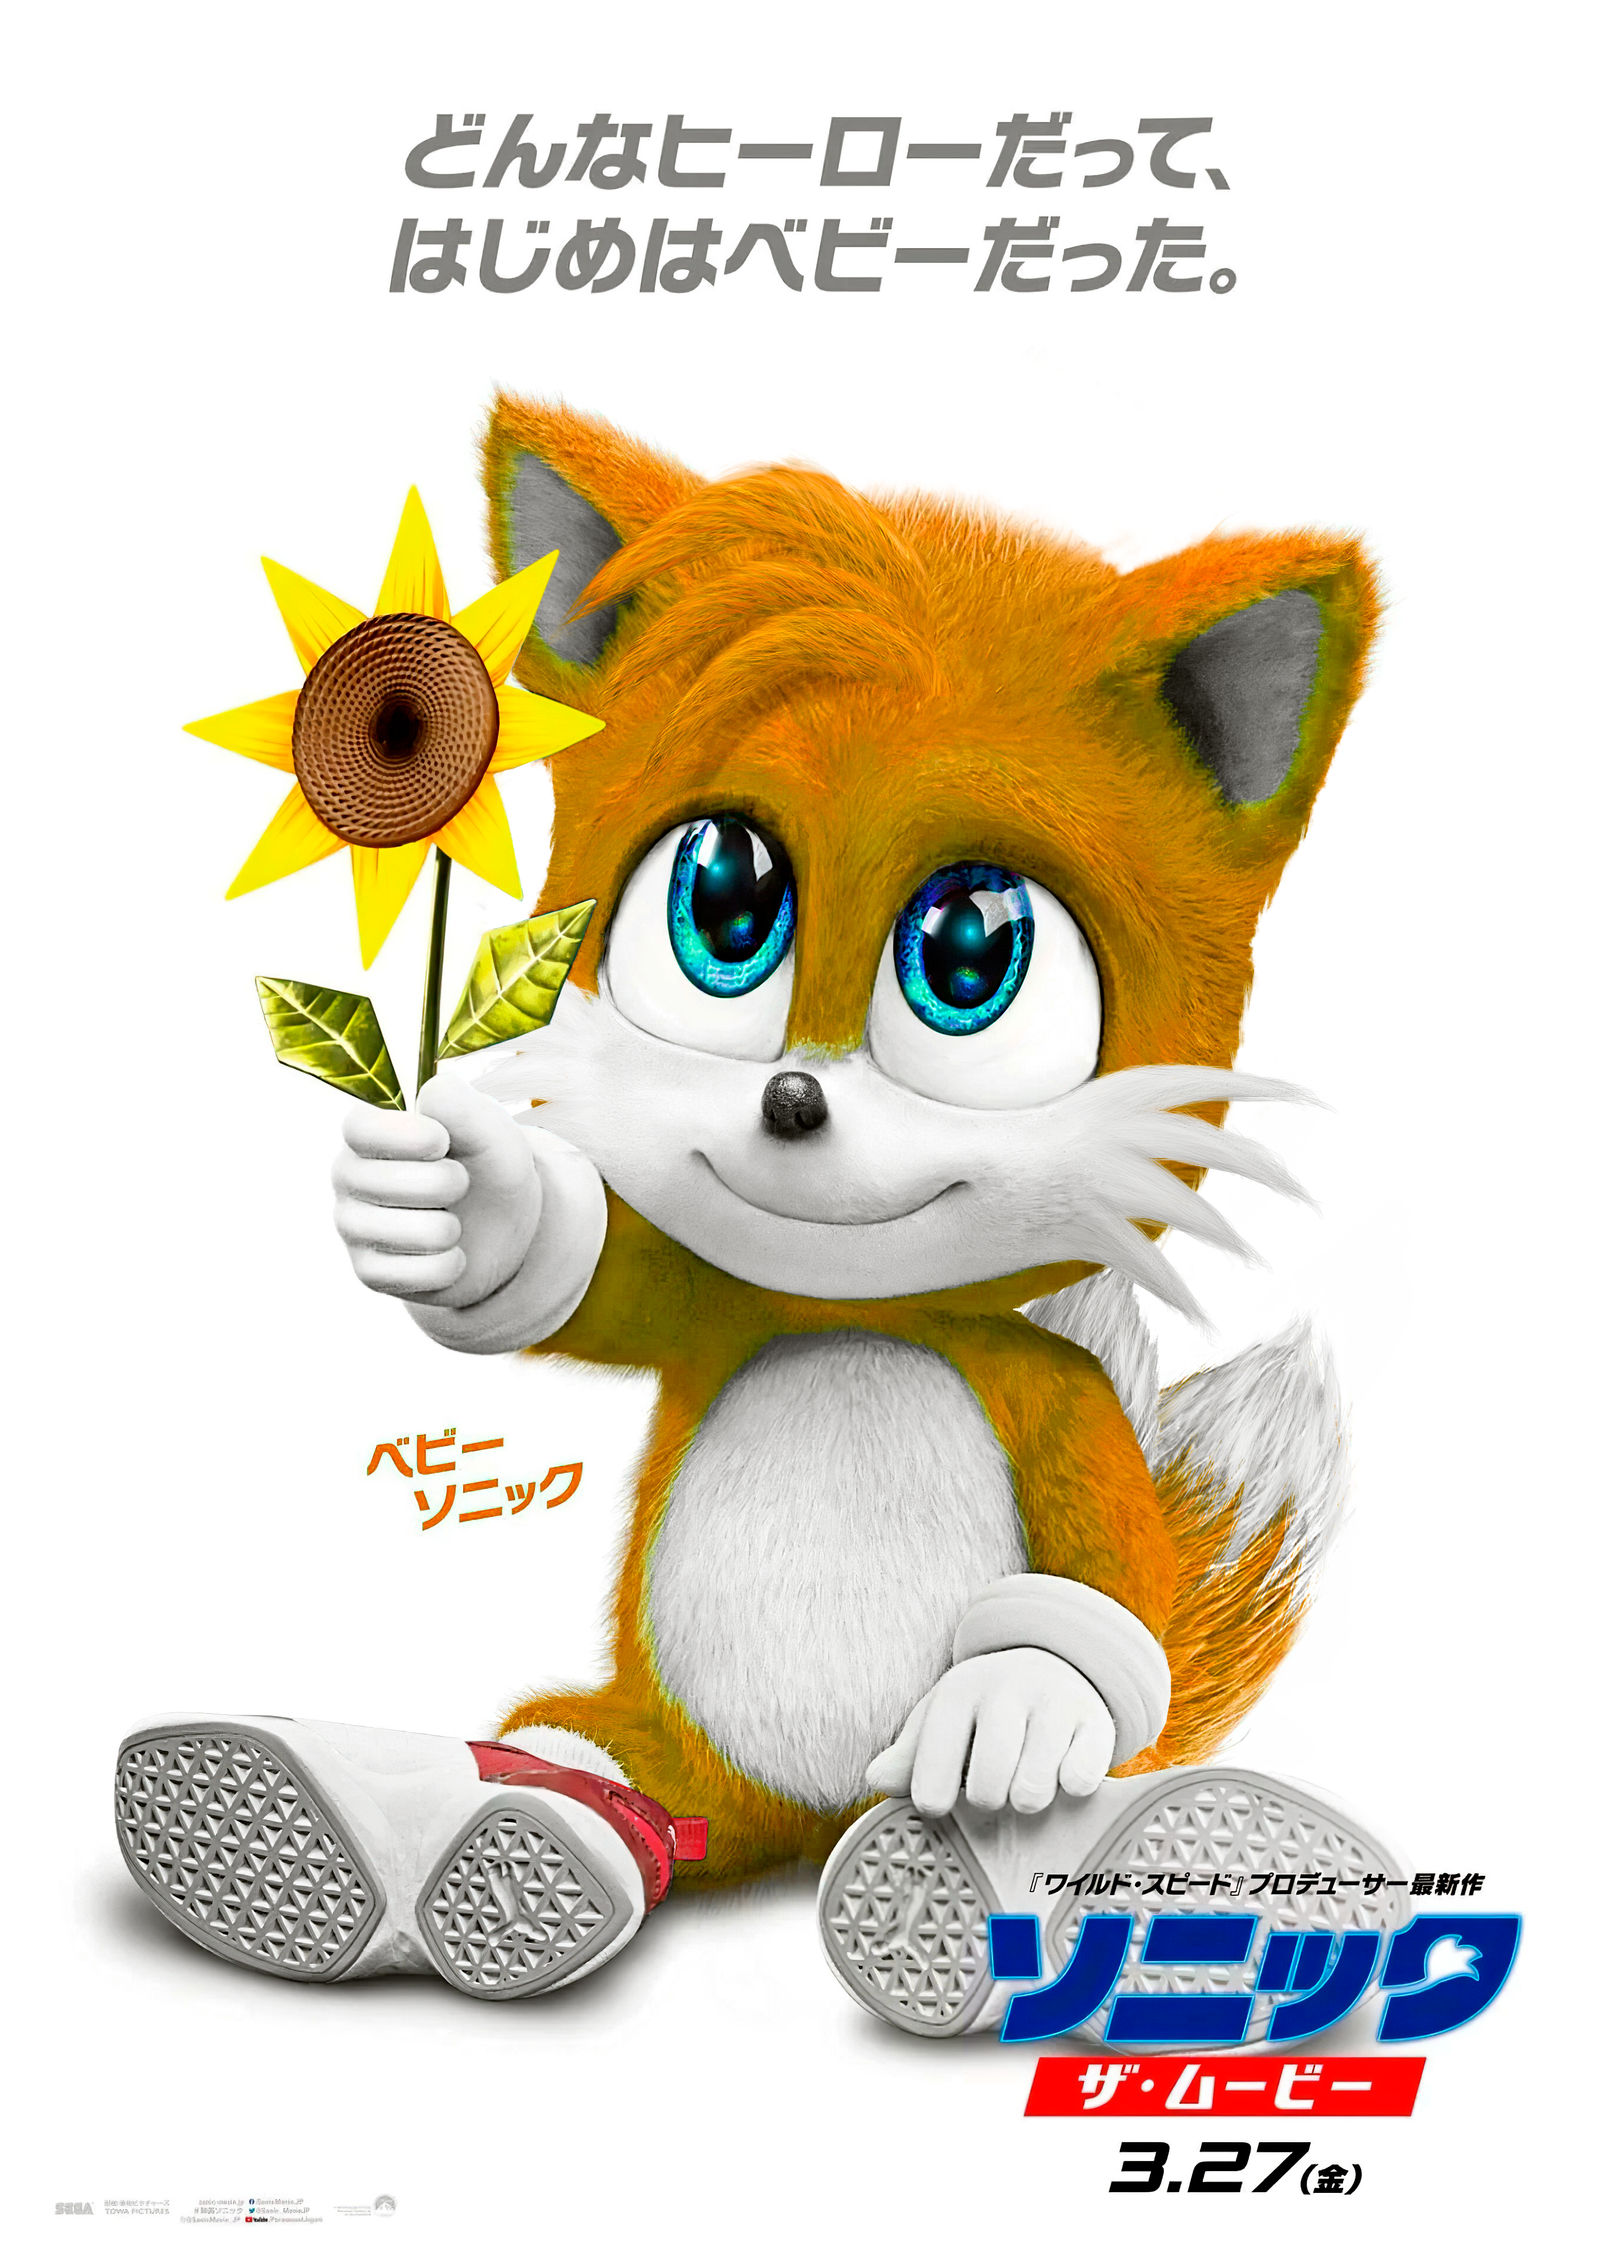 Tails Baby - Sonic the Movie Edit+Speed Edit video by Christian2099 on  DeviantArt